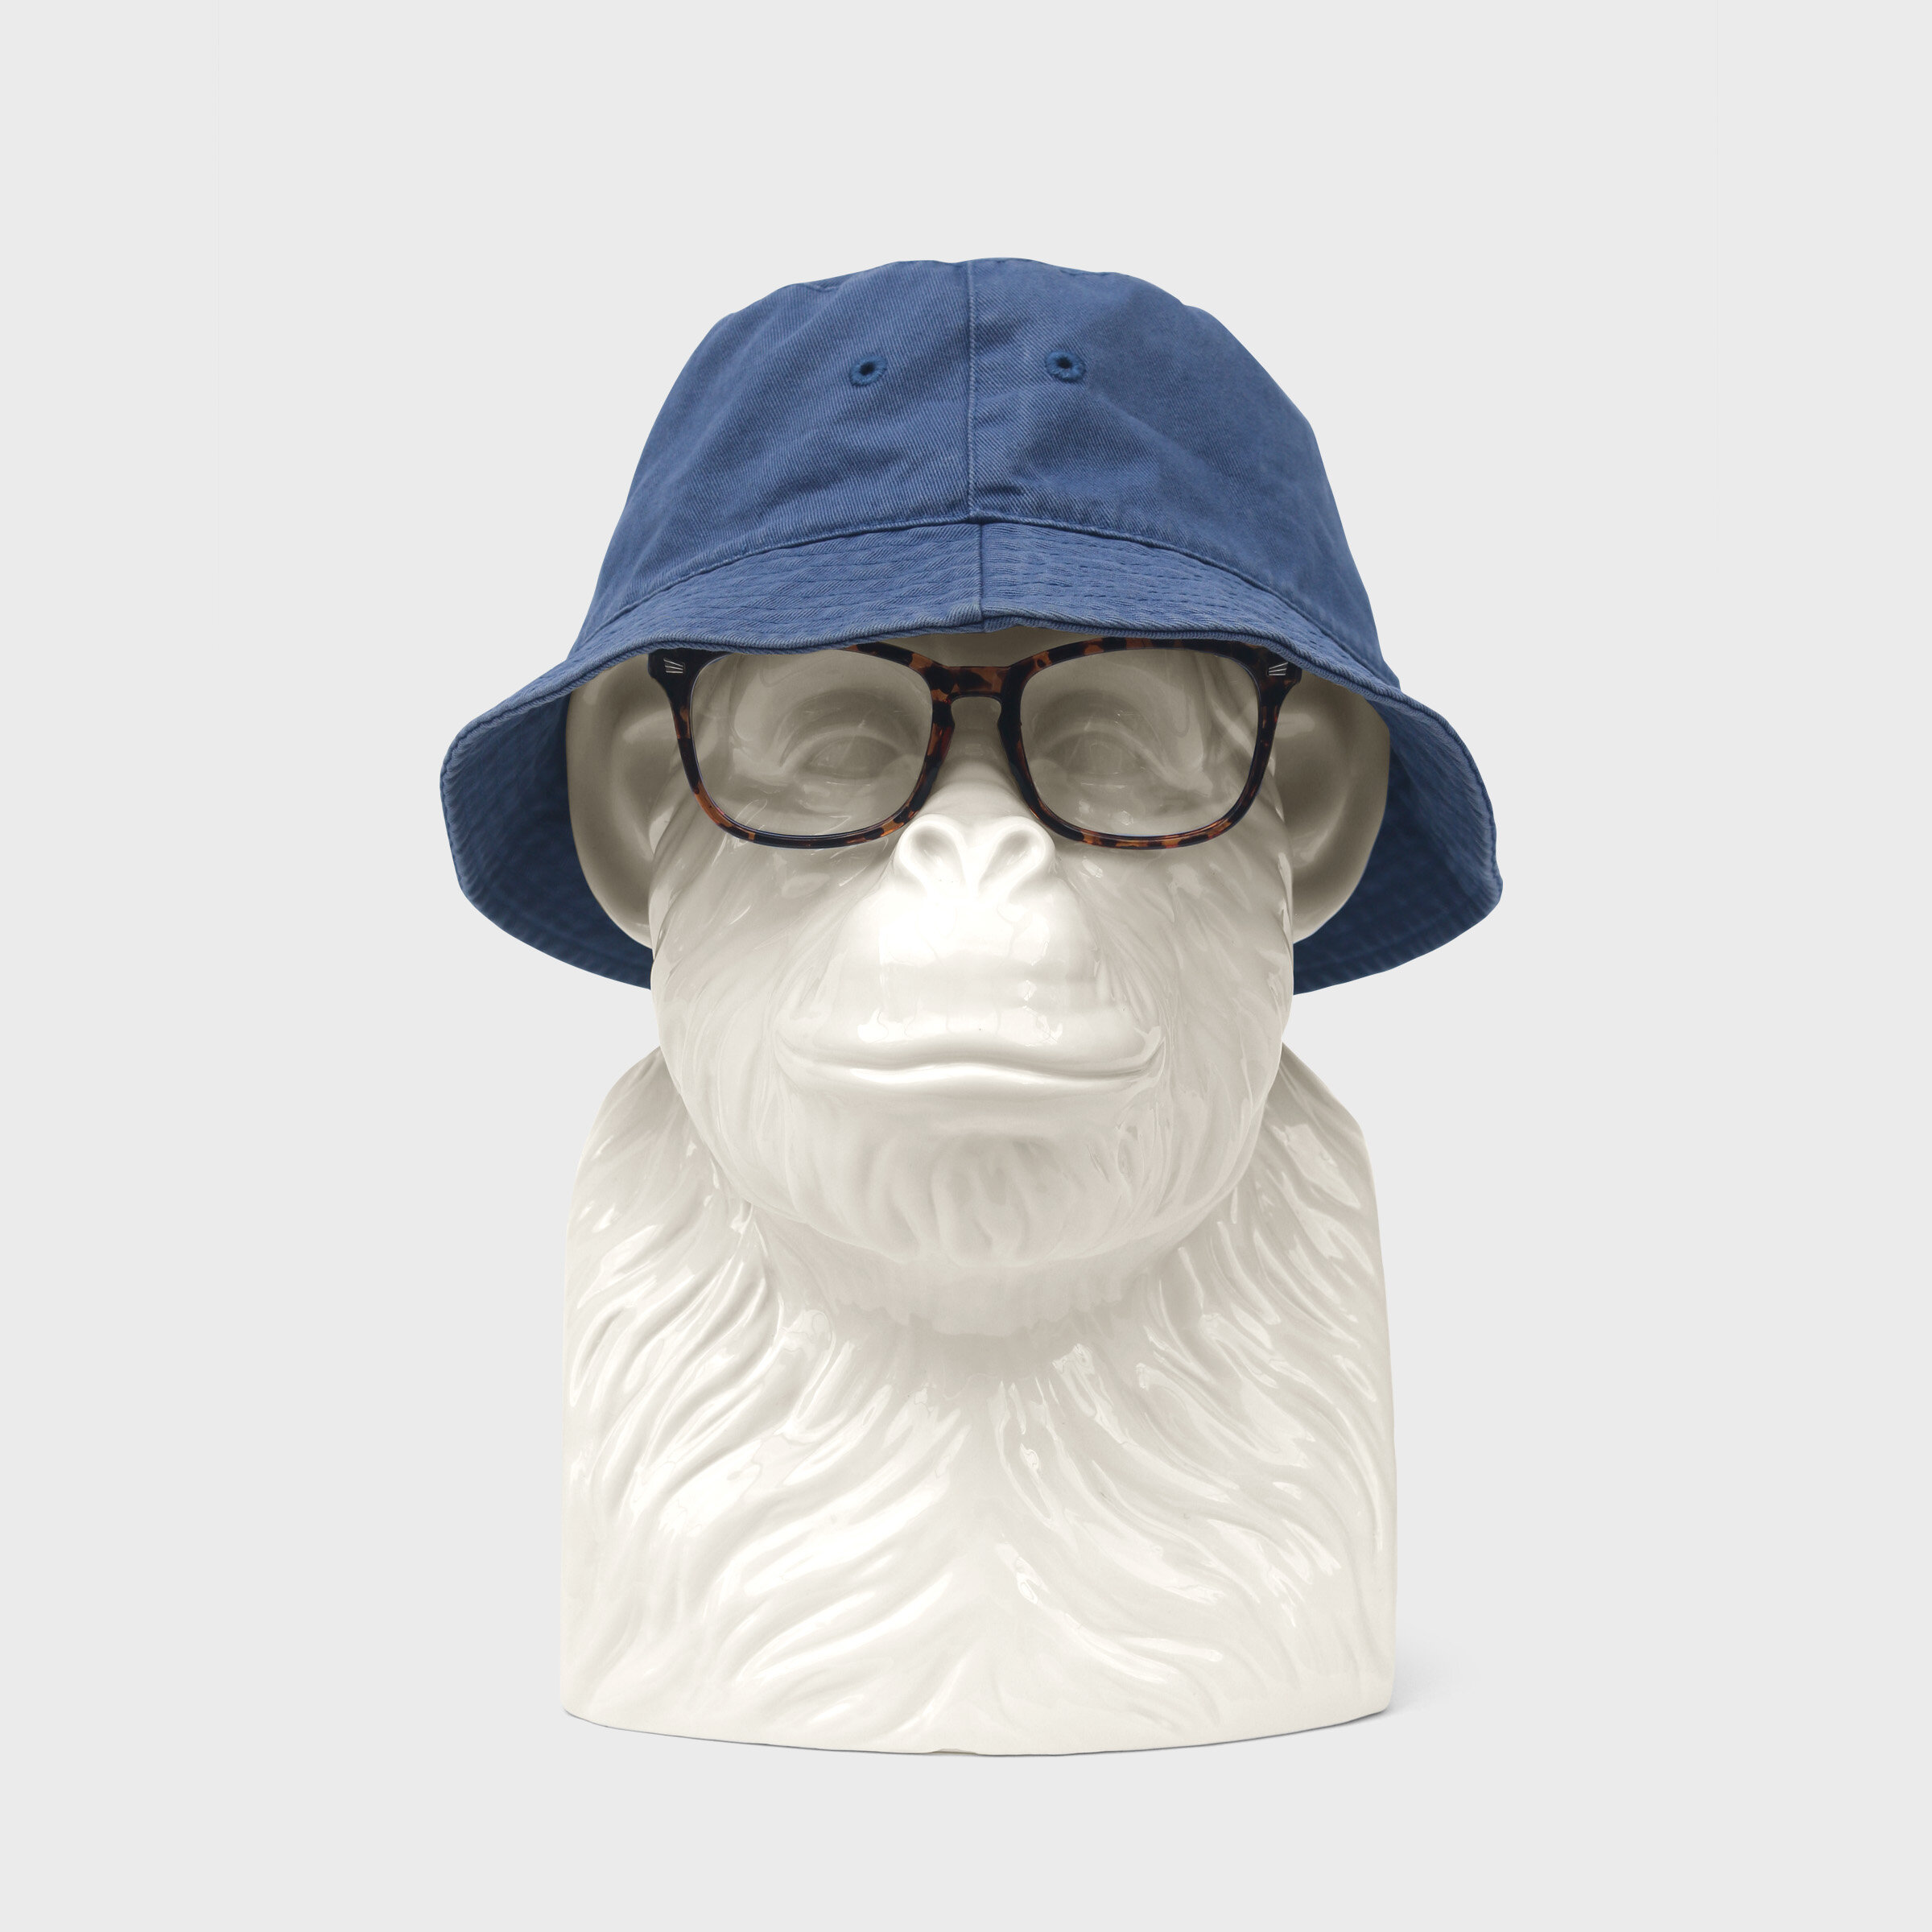 chimp with bucket hat